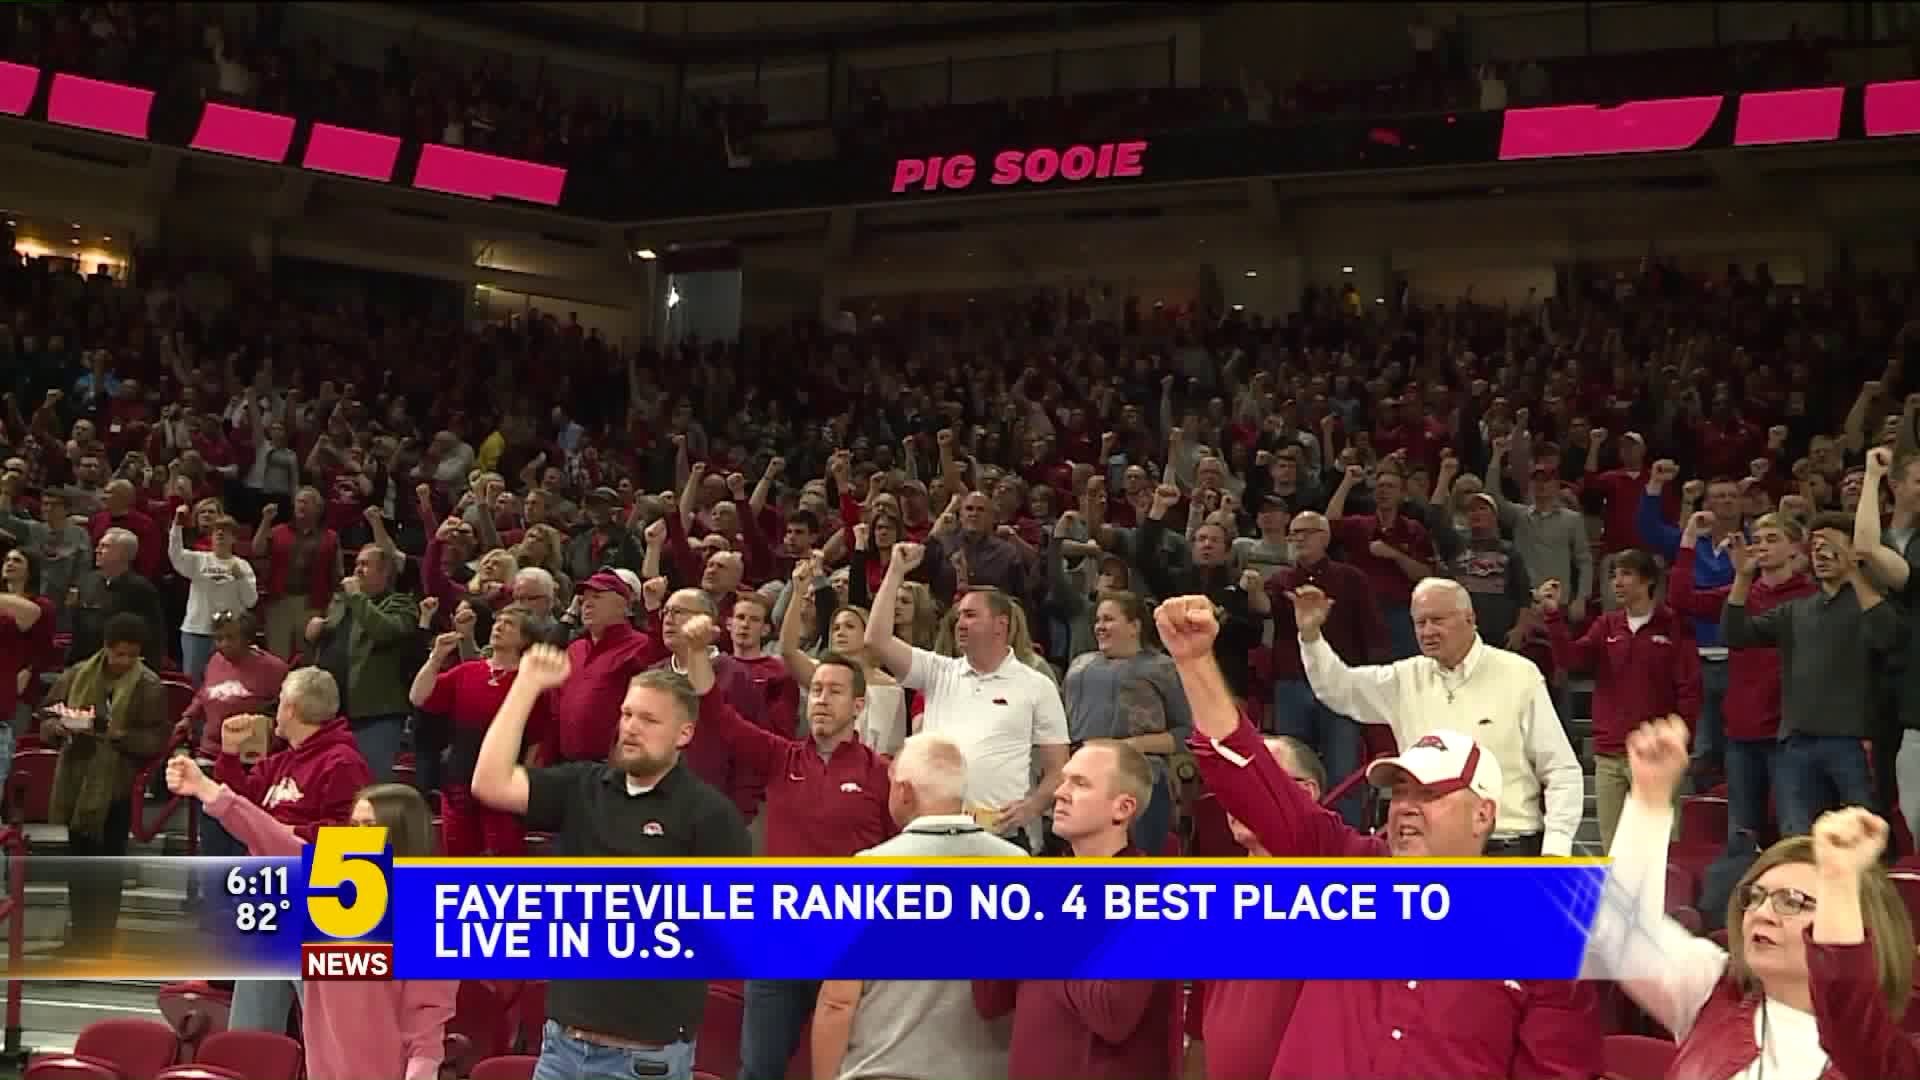 Fayetteville Ranked 4th Best Place to Live